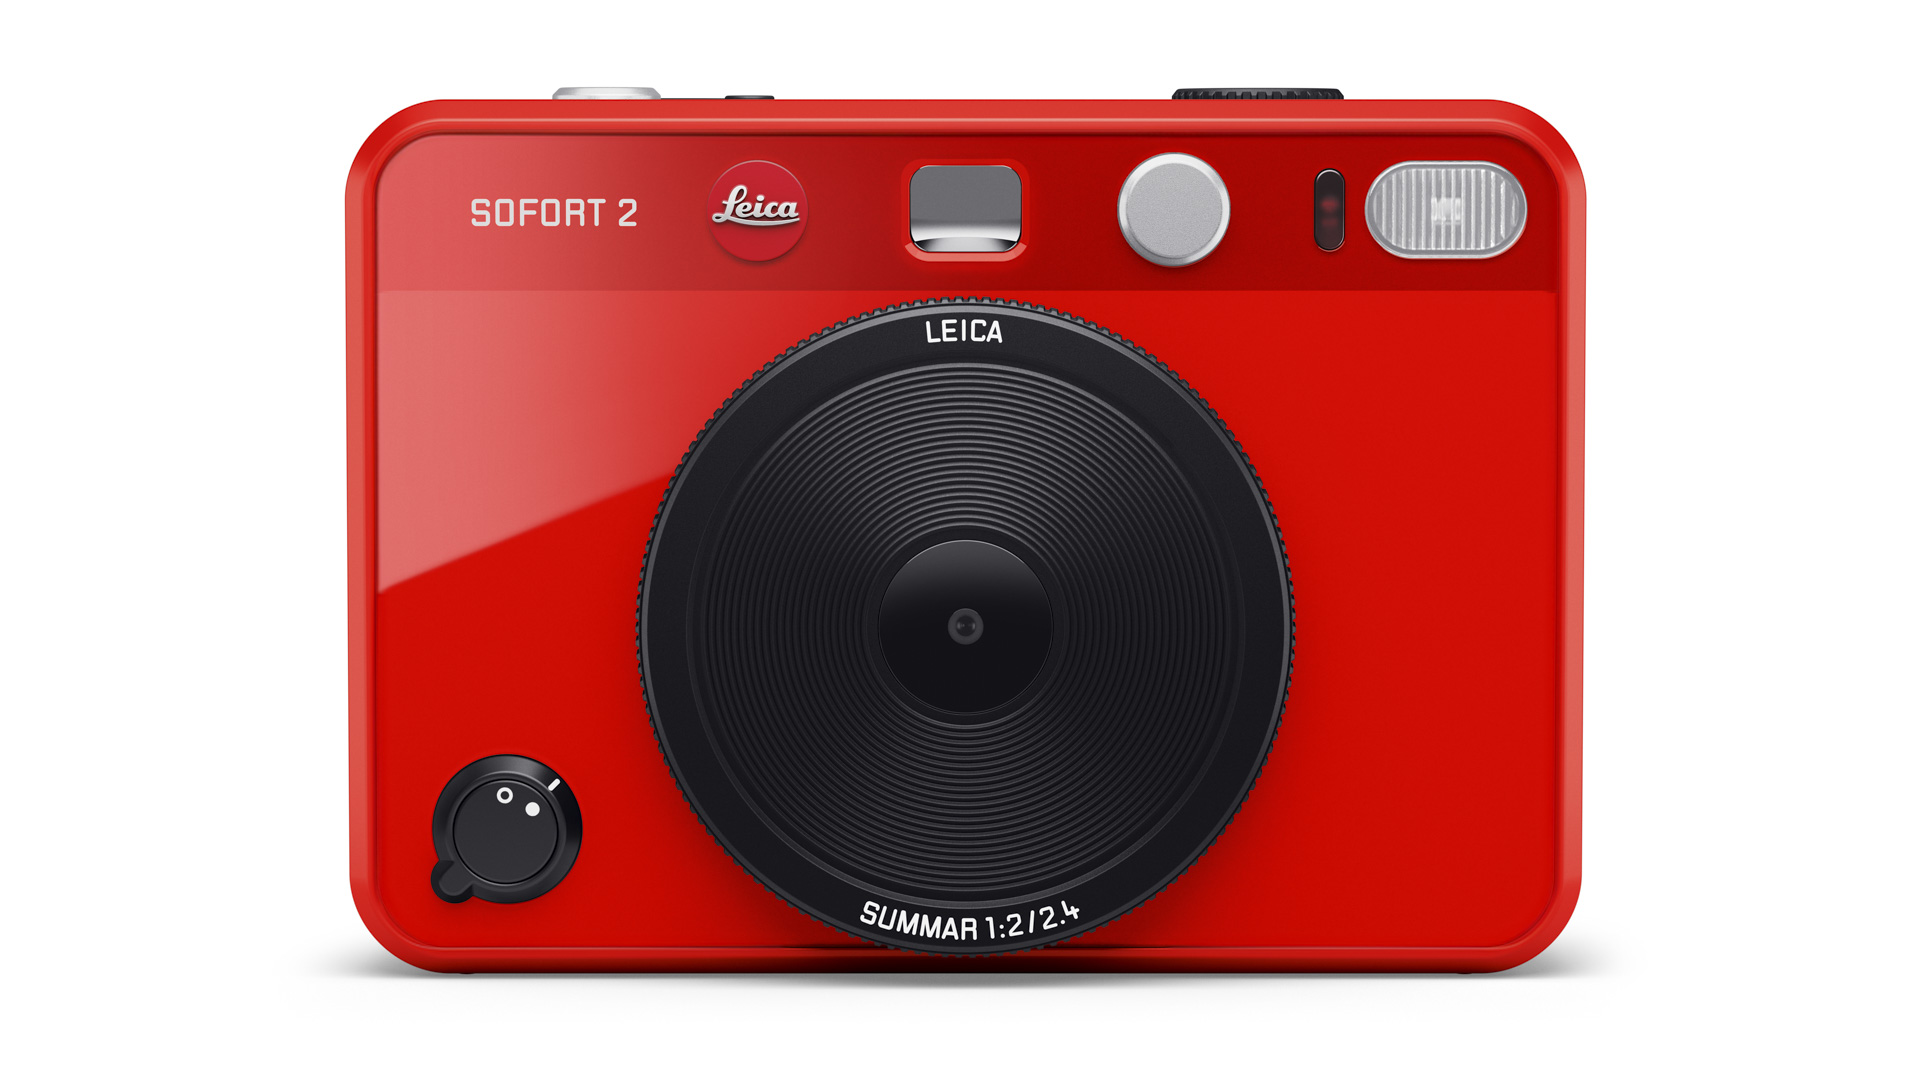 Leica Sofort 2 instant camera in red, on a white background